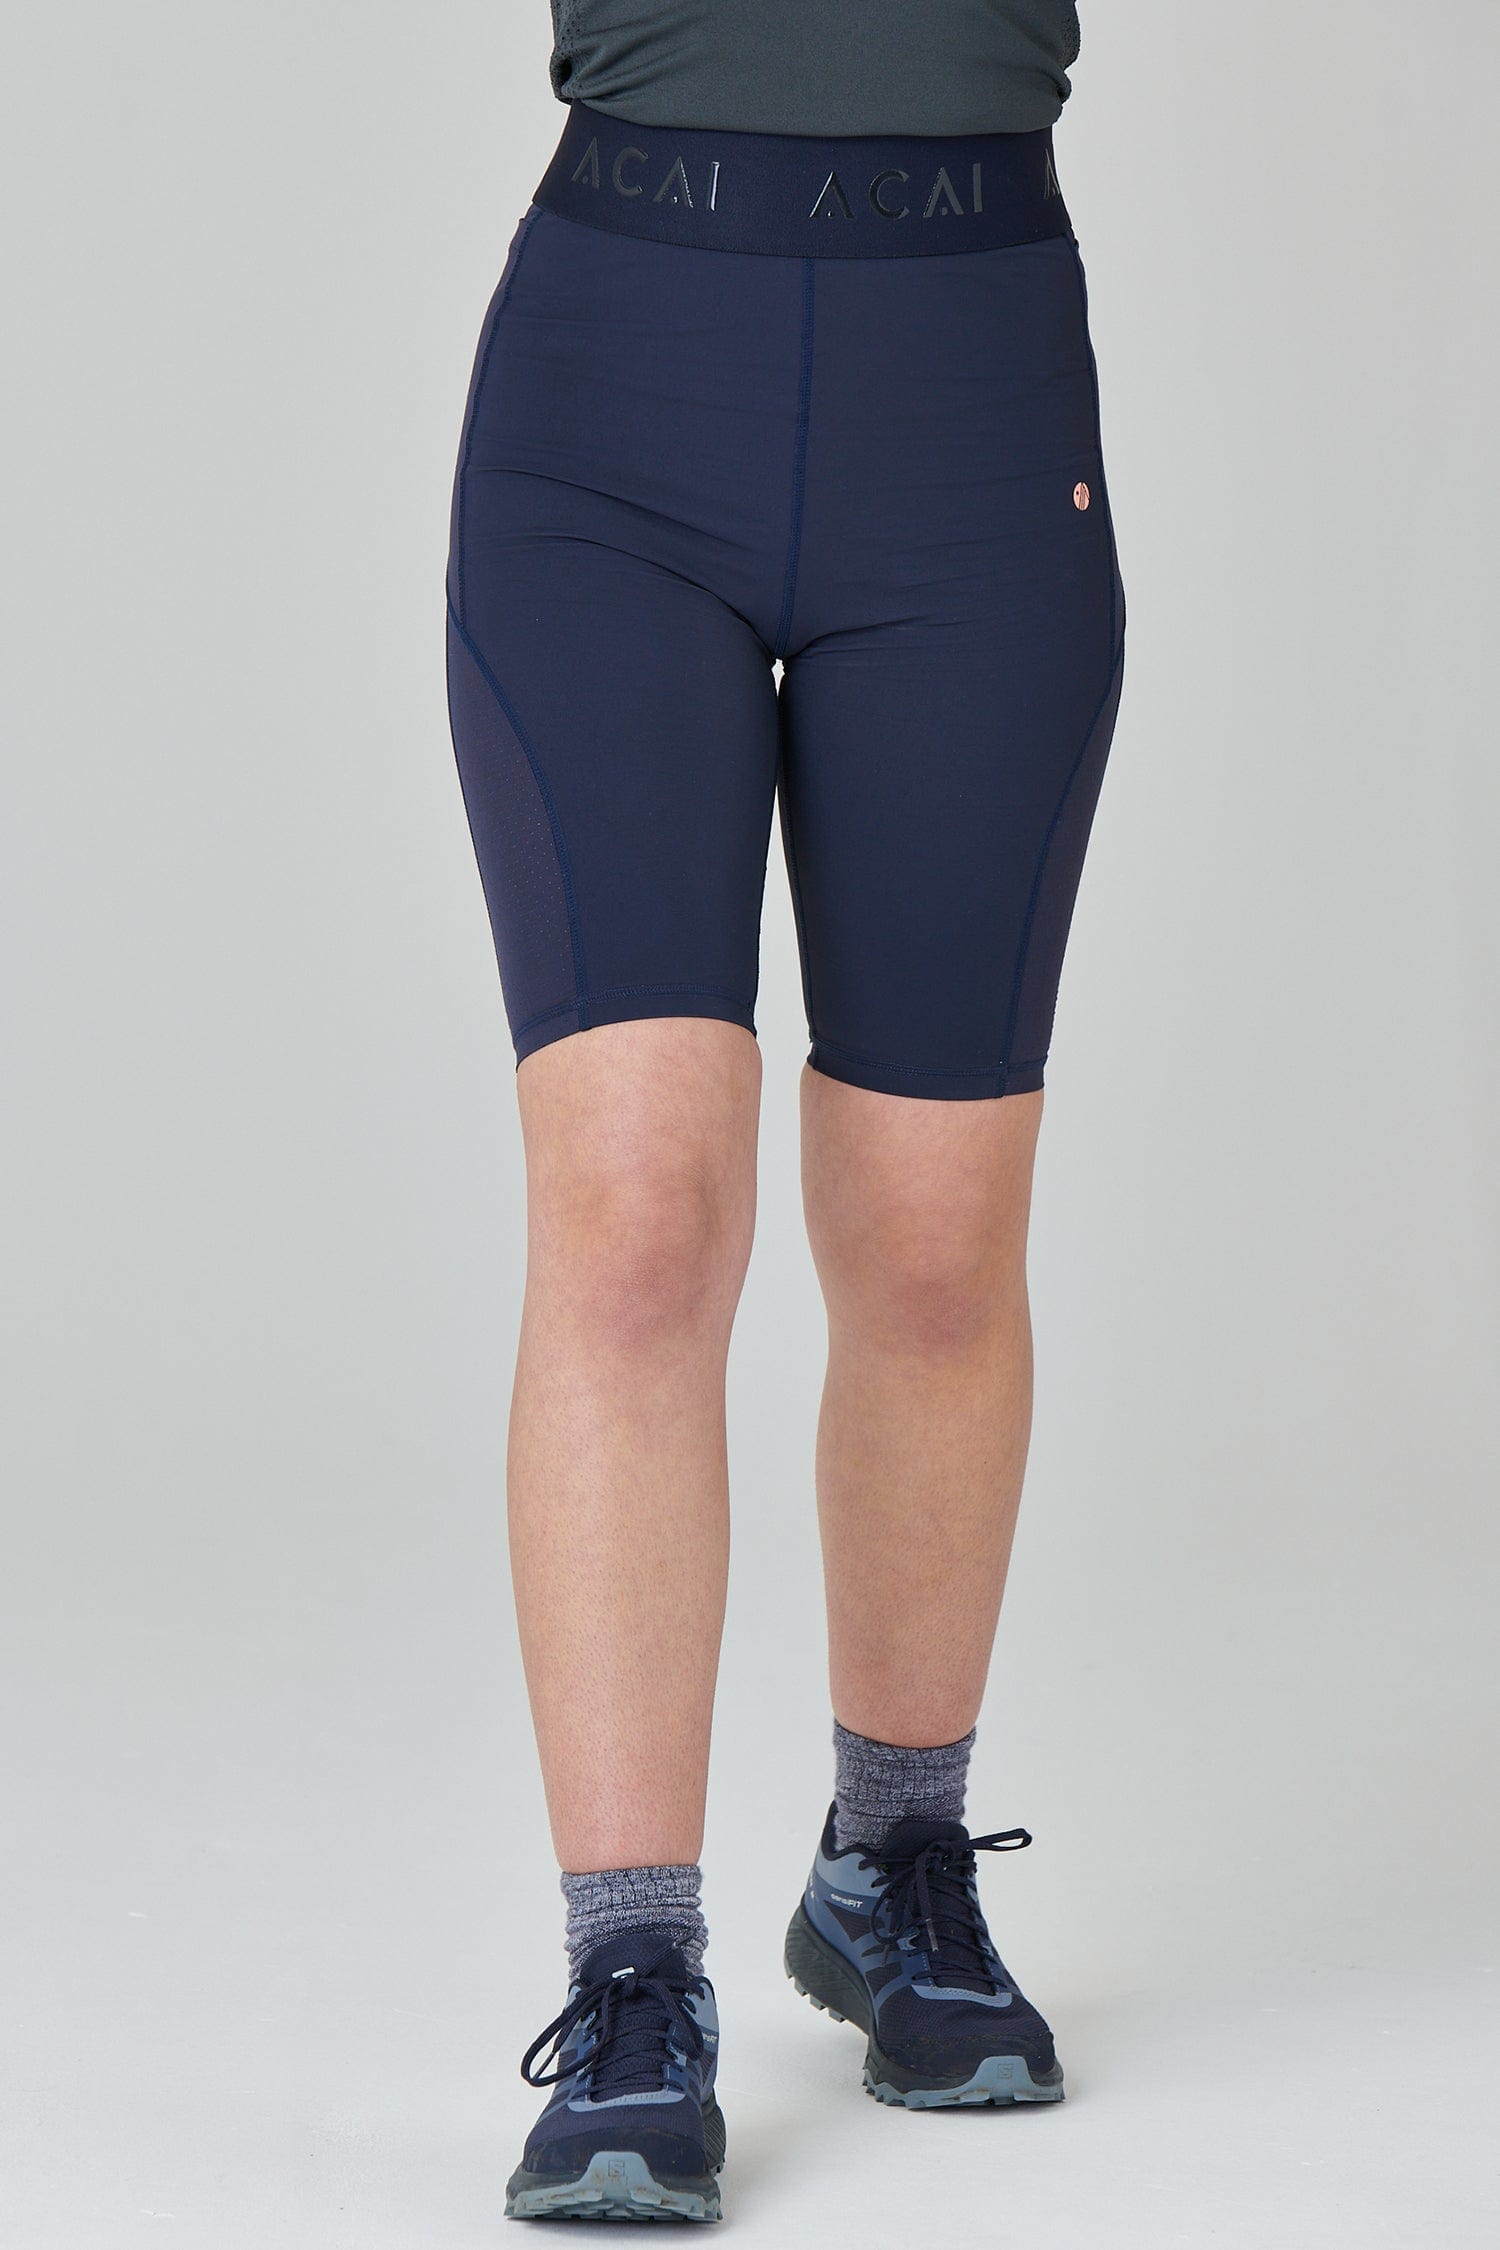 The Panelled Shorts- Midnight Blue - Small / Uk10 - Womens - Acai Outdoorwear